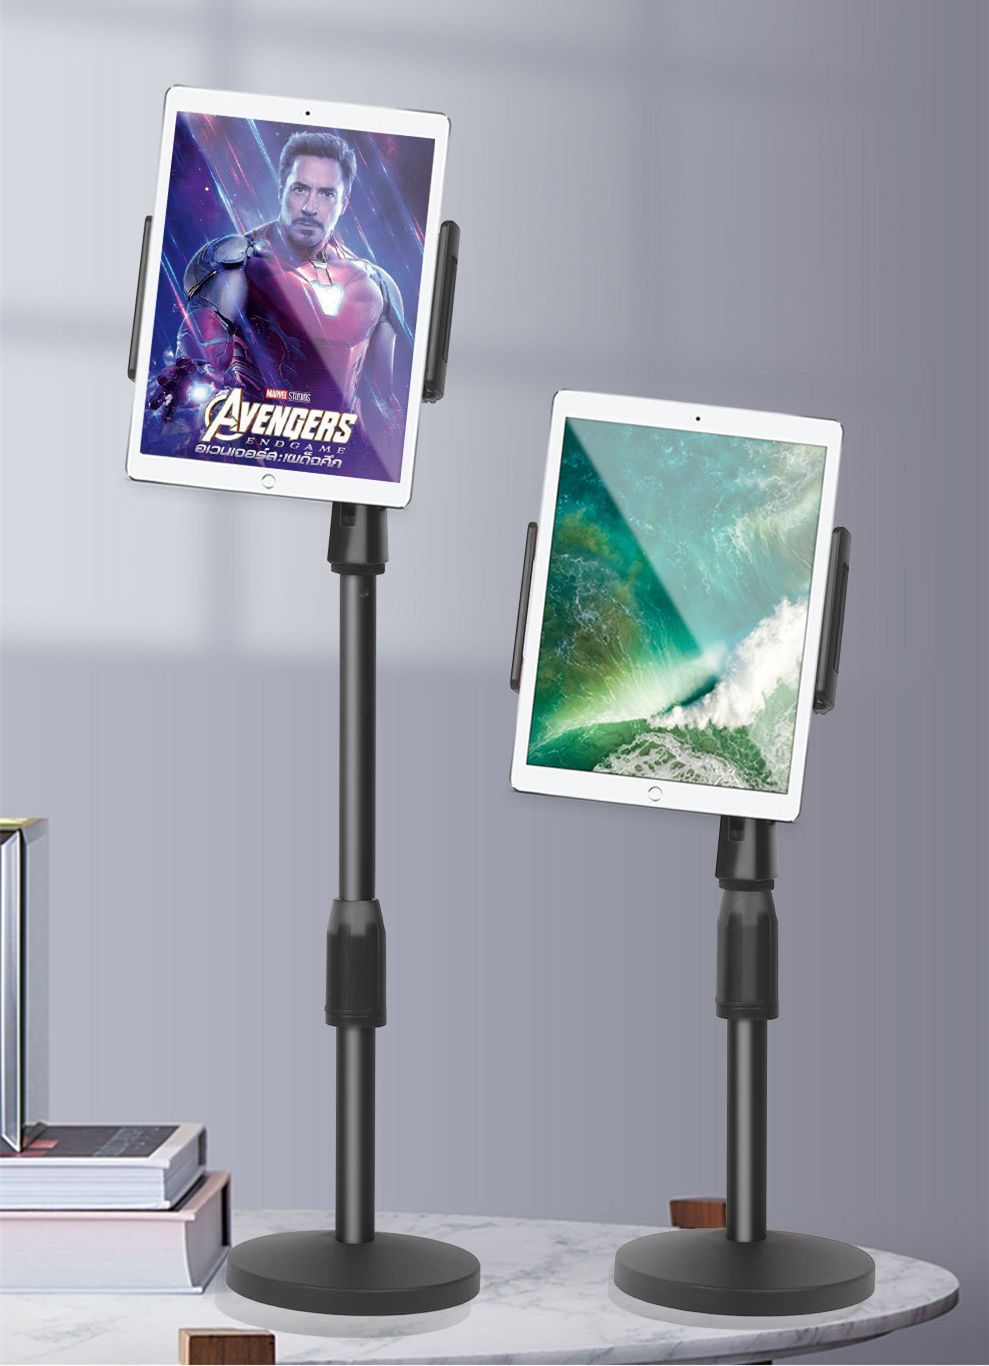 Bakeey-PC-10-Universal-Live-Broadcast-Foldable-Adjustable-Height-Stand-Holder-for-Mobile-Phone-Table-1803617-5